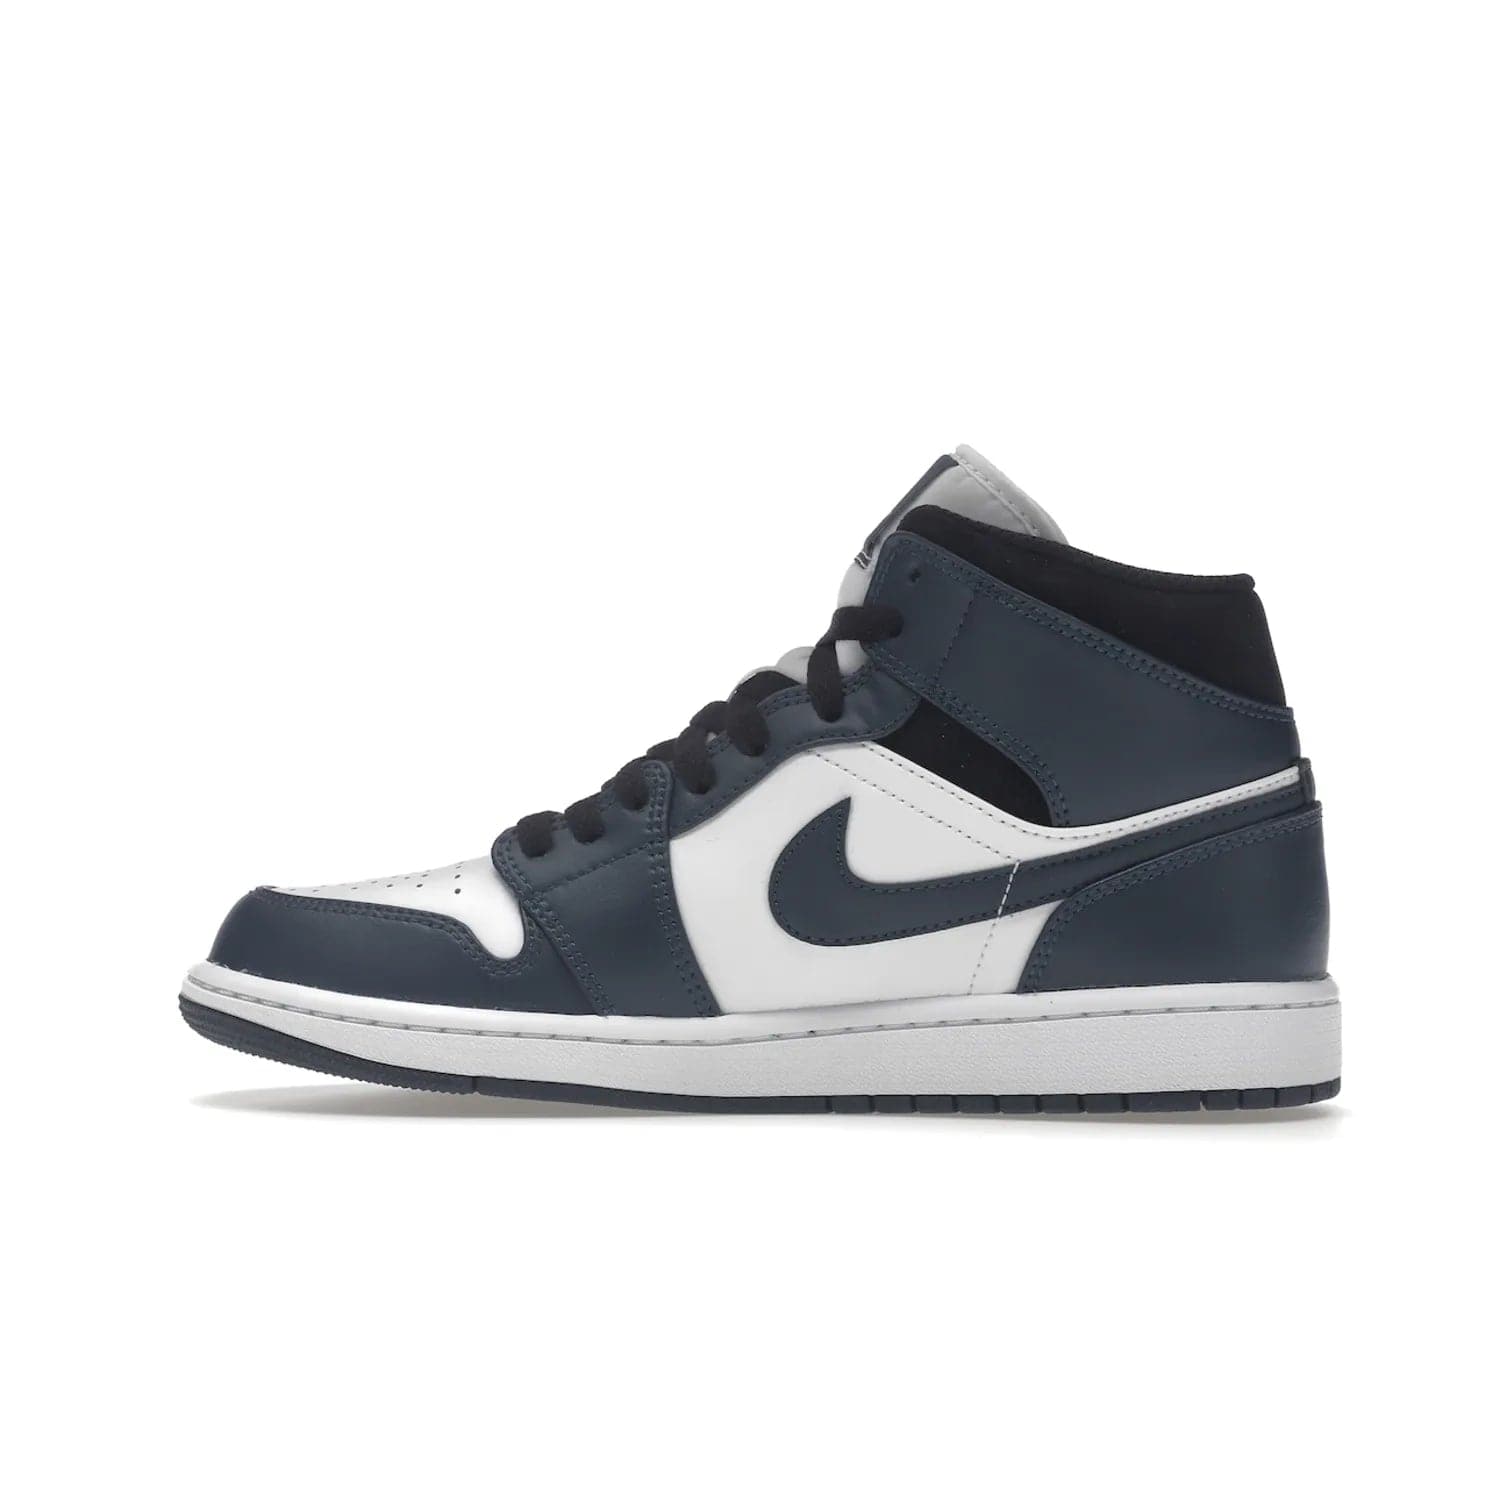 Jordan 1 Mid Armory Navy - Image 20 - Only at www.BallersClubKickz.com - The Jordan 1 Mid Armory Navy: classic basketball sneaker with soft white leather upper, deep navy blue overlays, and black leather ankle detailing. Iconic style with Jordan Wings logo and Jumpman label.